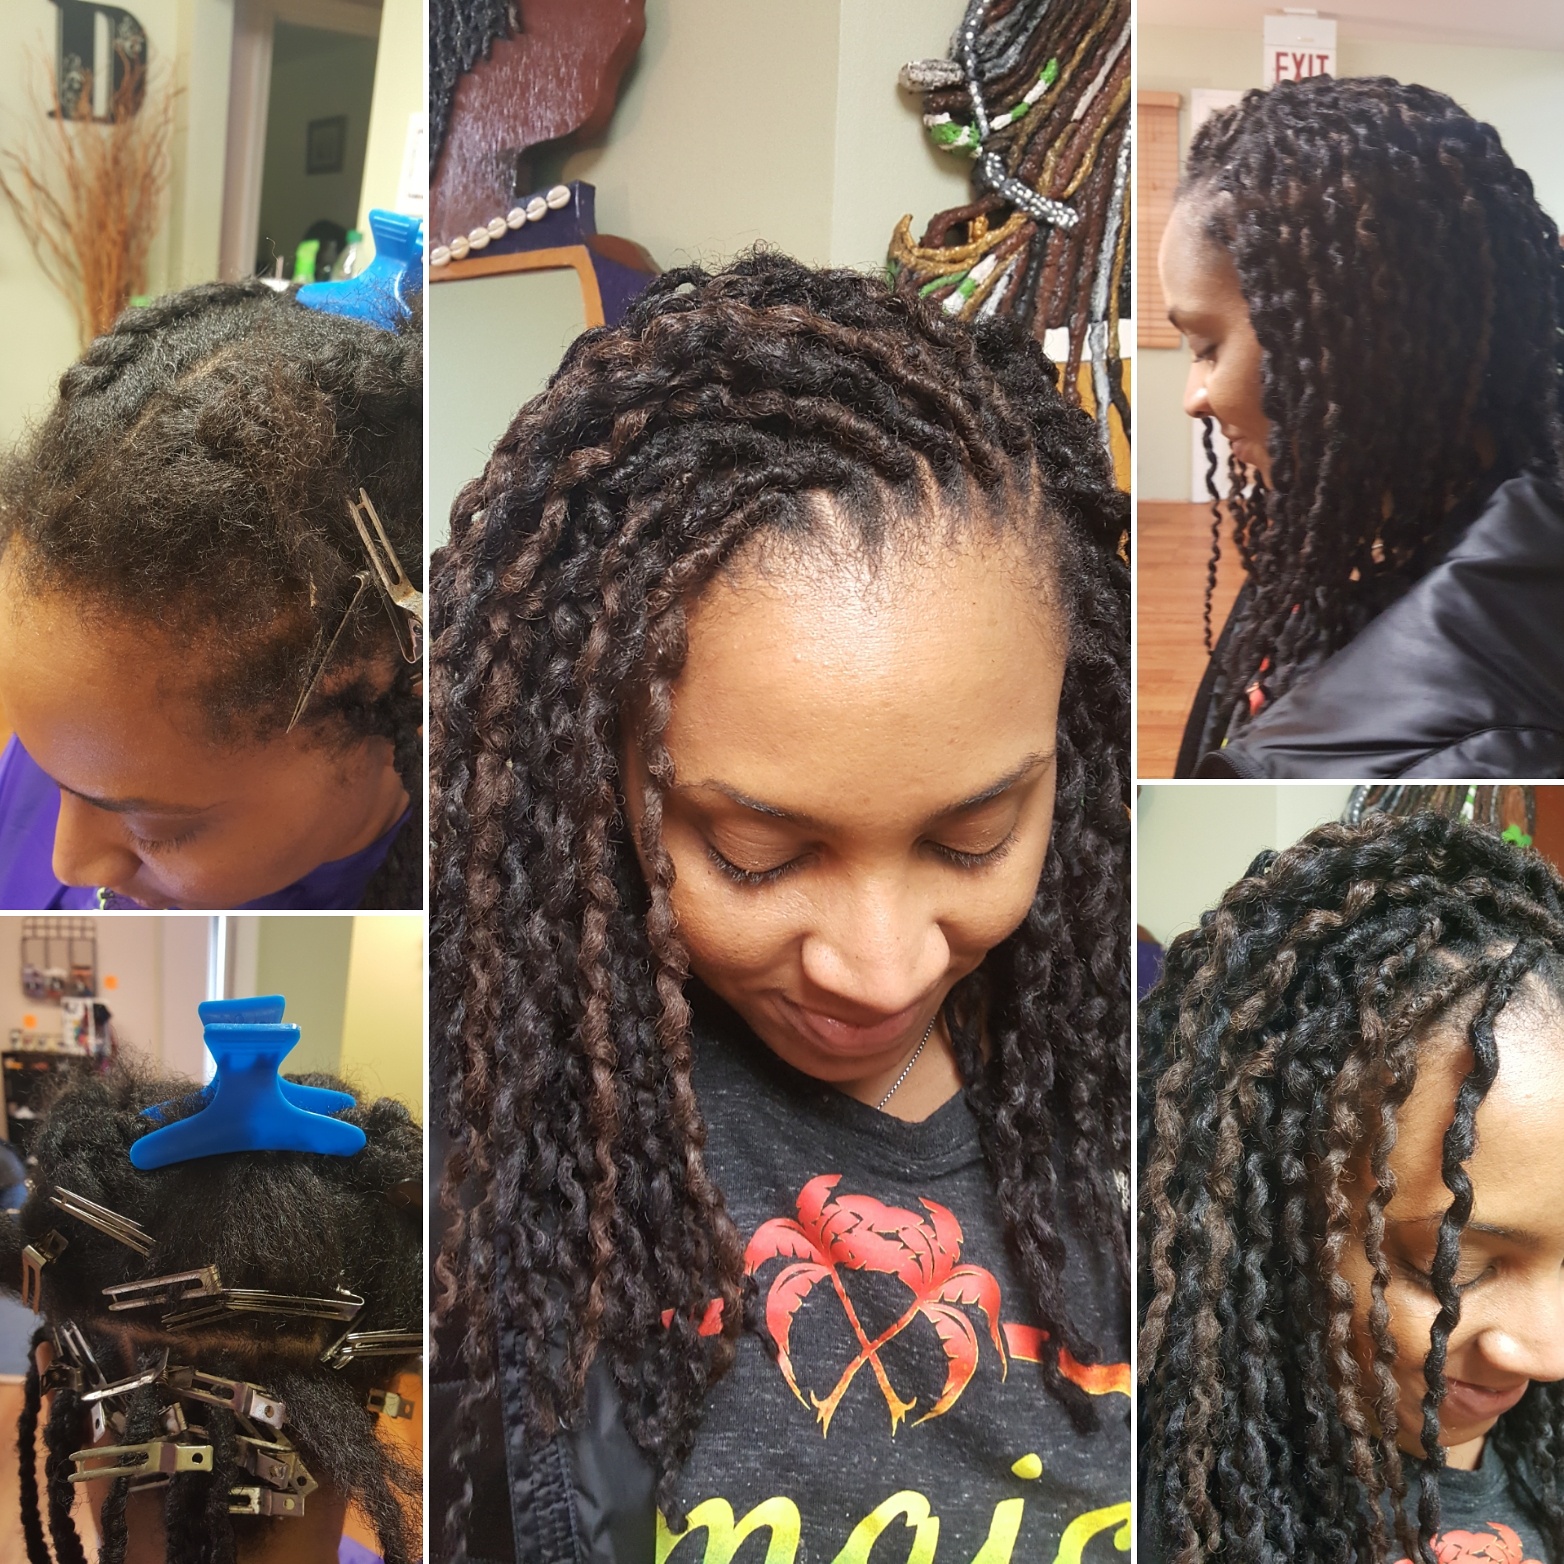 BLACK HISTORY MONTH SPECIAL – B.A.D. Braids And Dreds